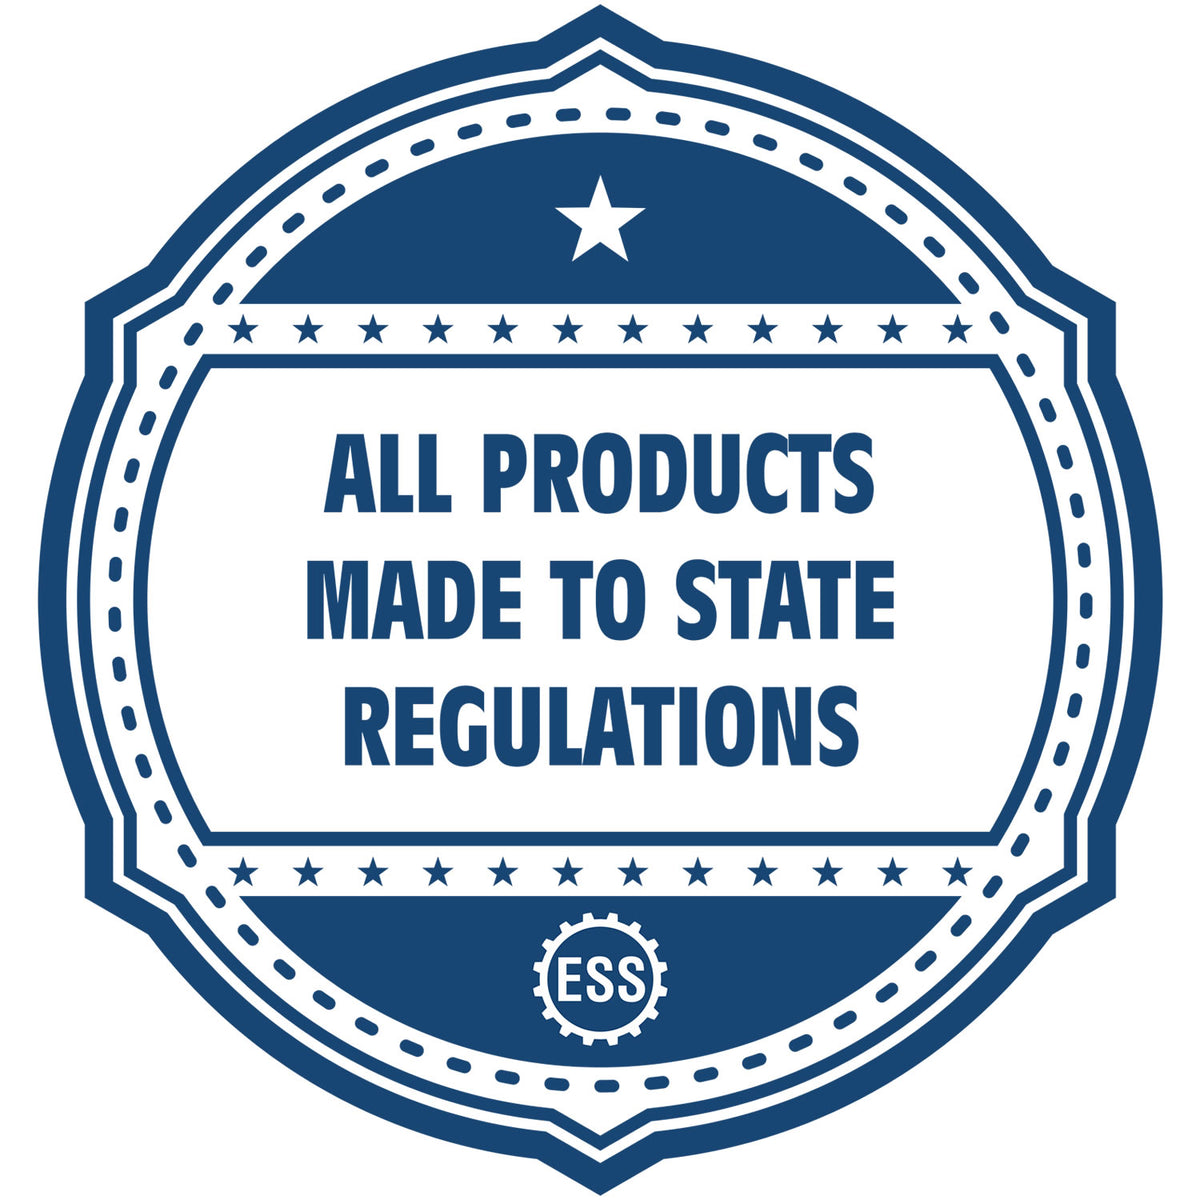 An icon or badge element for the State of Connecticut Soft Land Surveyor Embossing Seal showing that this product is made in compliance with state regulations.